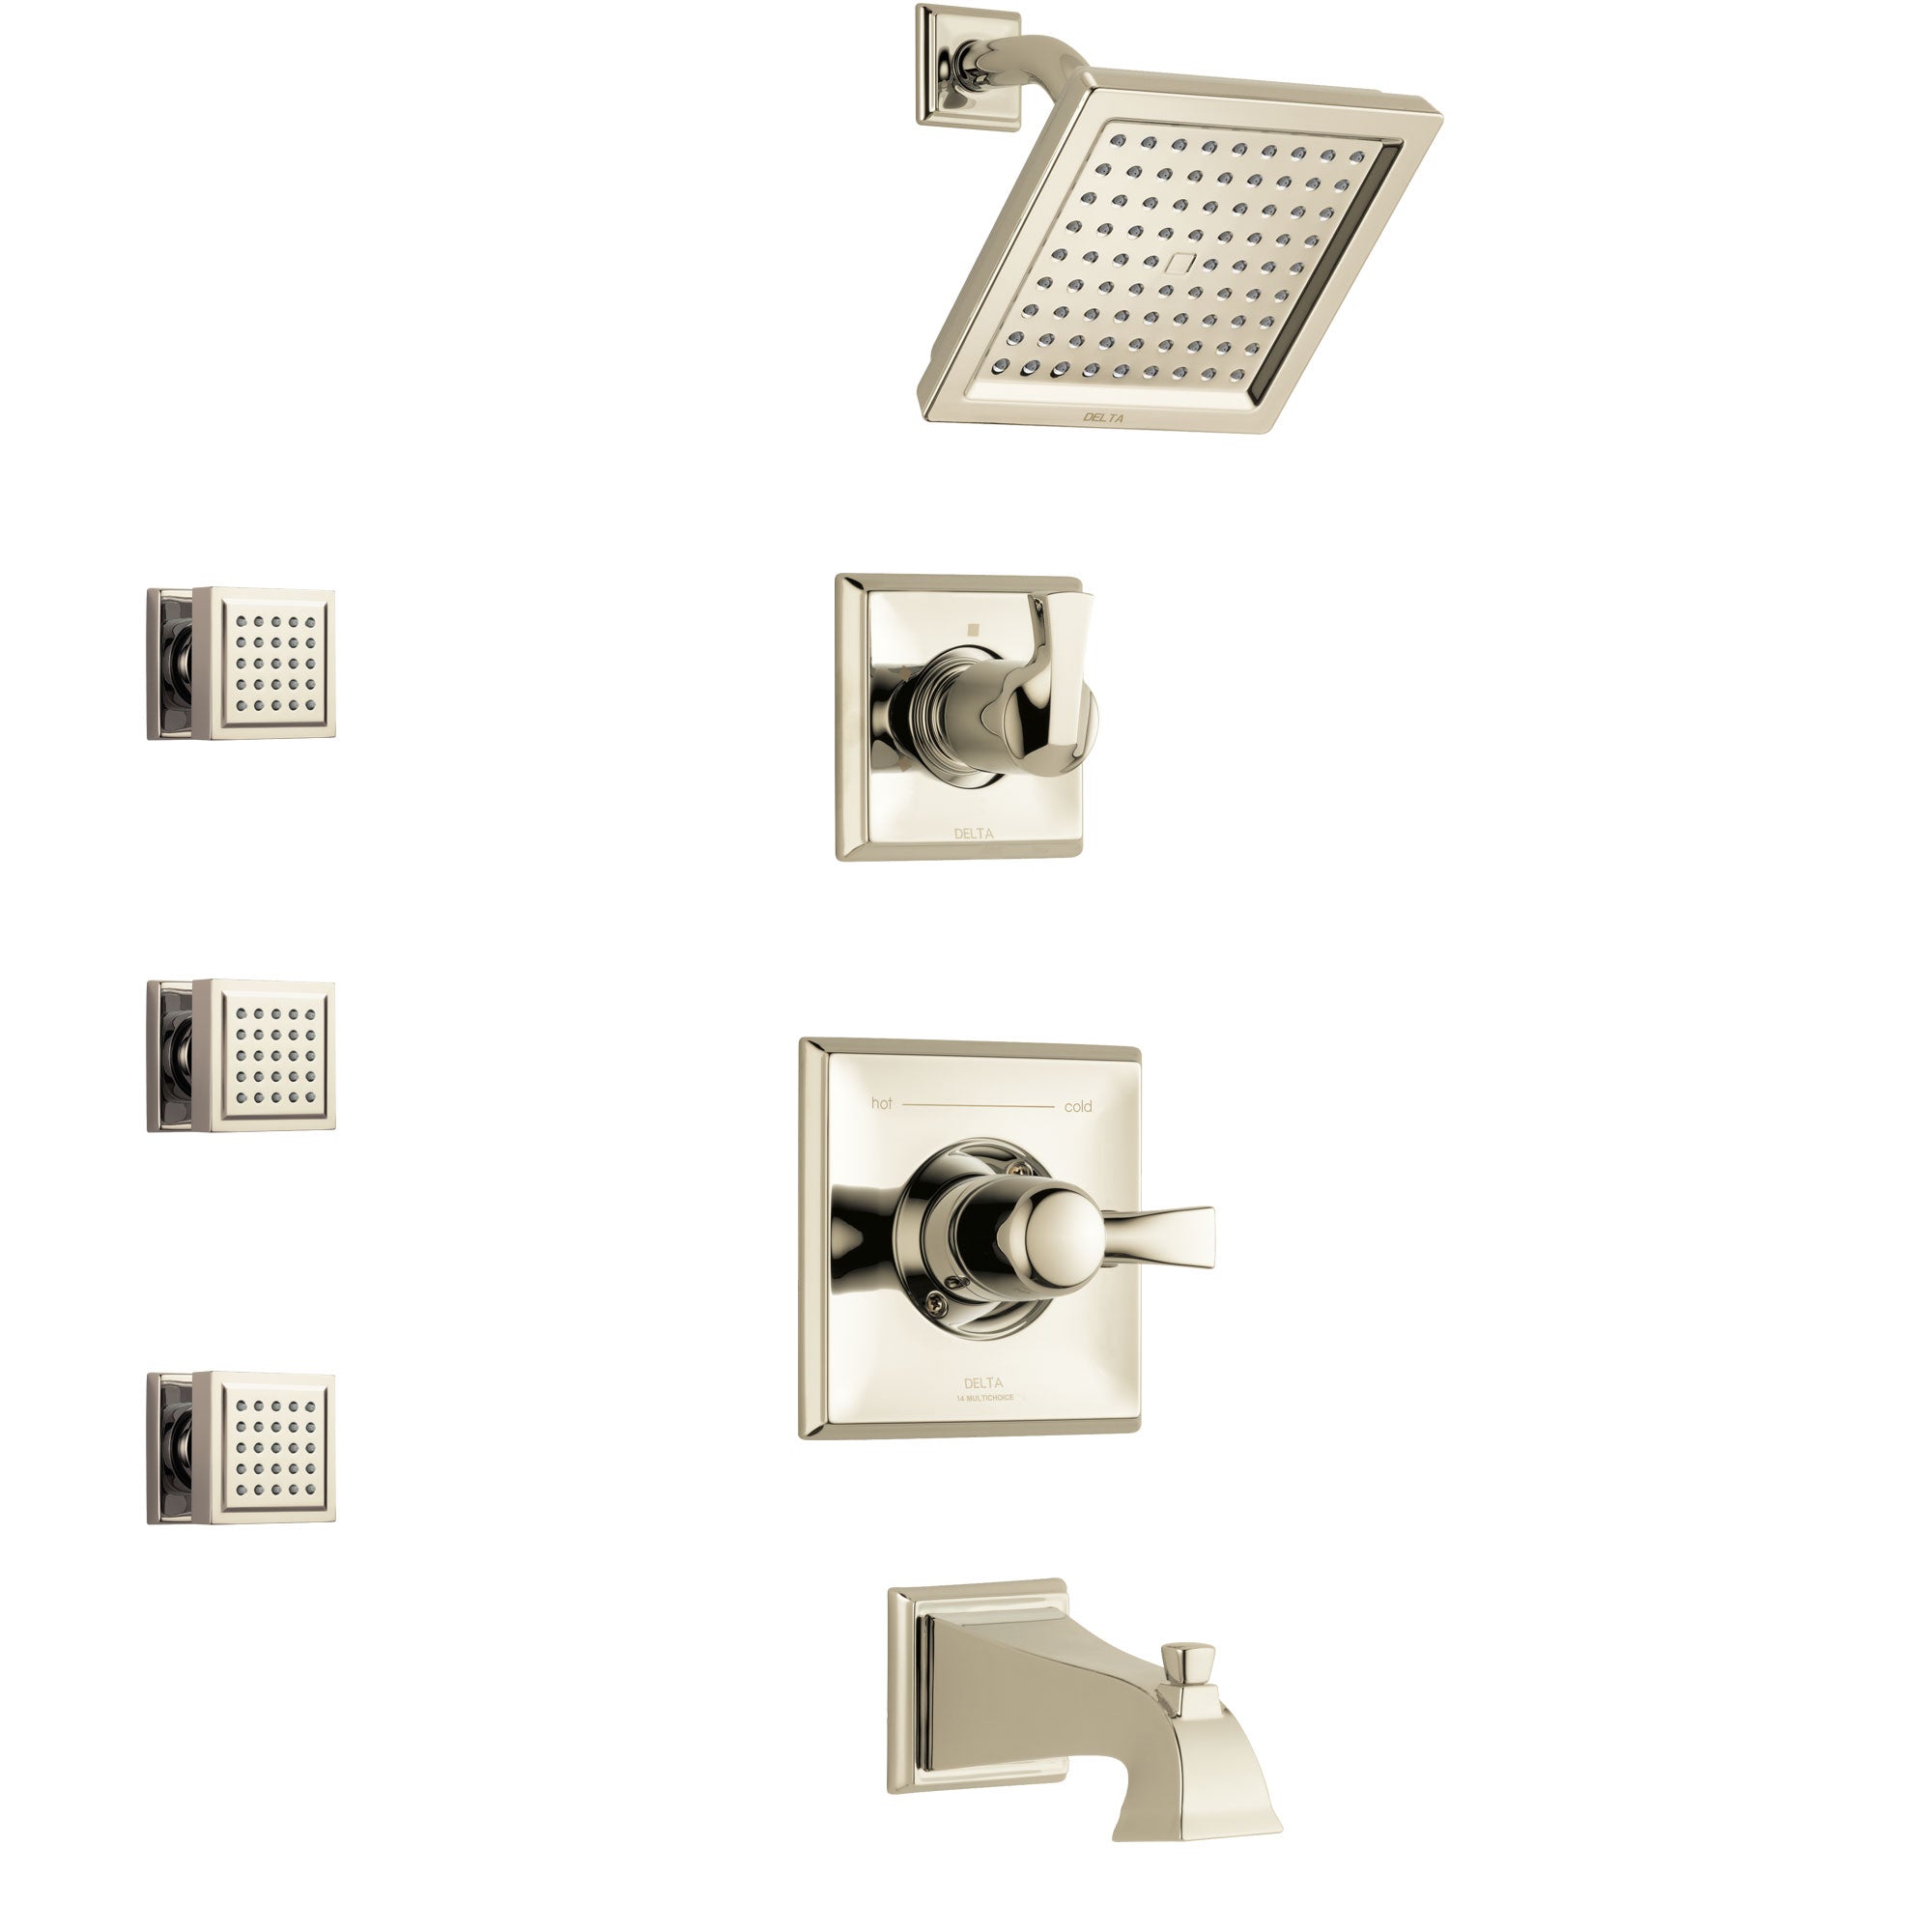 Delta Dryden Polished Nickel Finish Tub and Shower System with Control Handle, 3-Setting Diverter, Showerhead, and 3 Body Sprays SS144511PN1